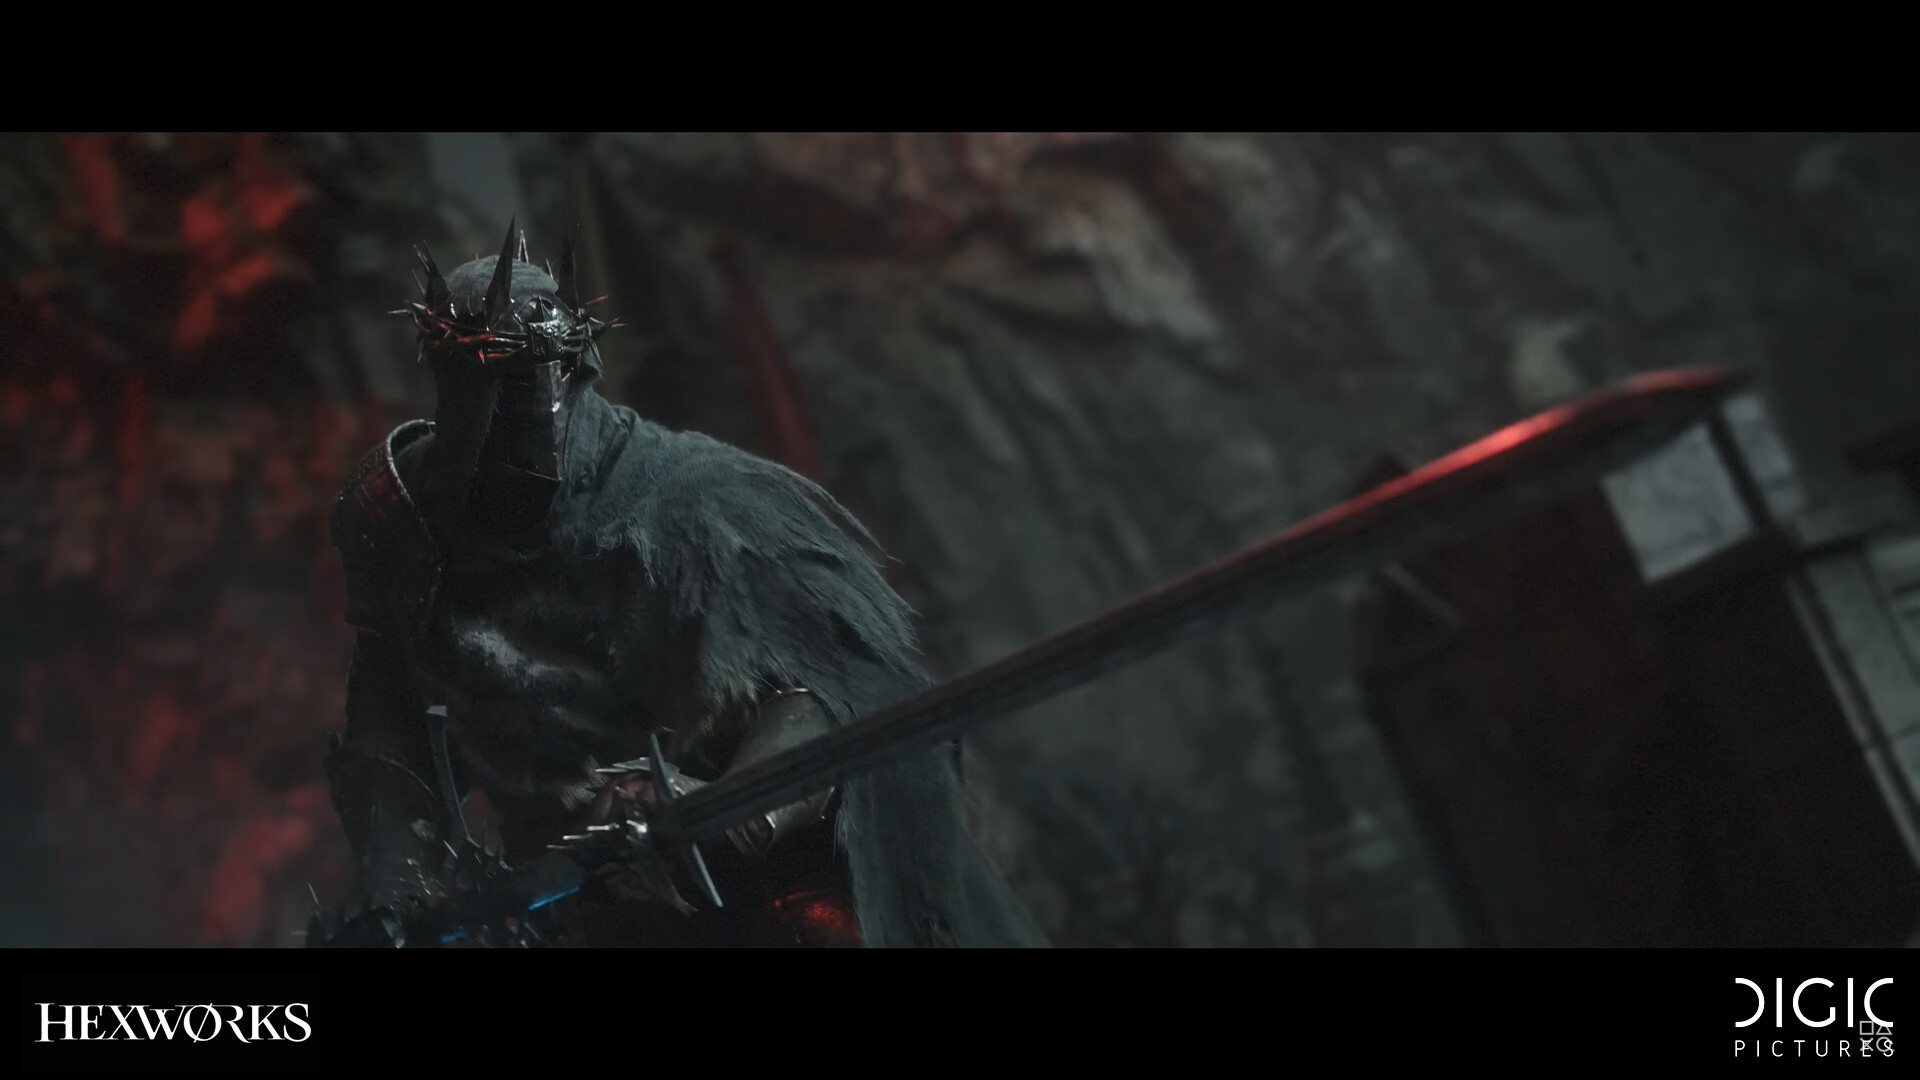 The Lords of the Fallen - Announcement Trailer